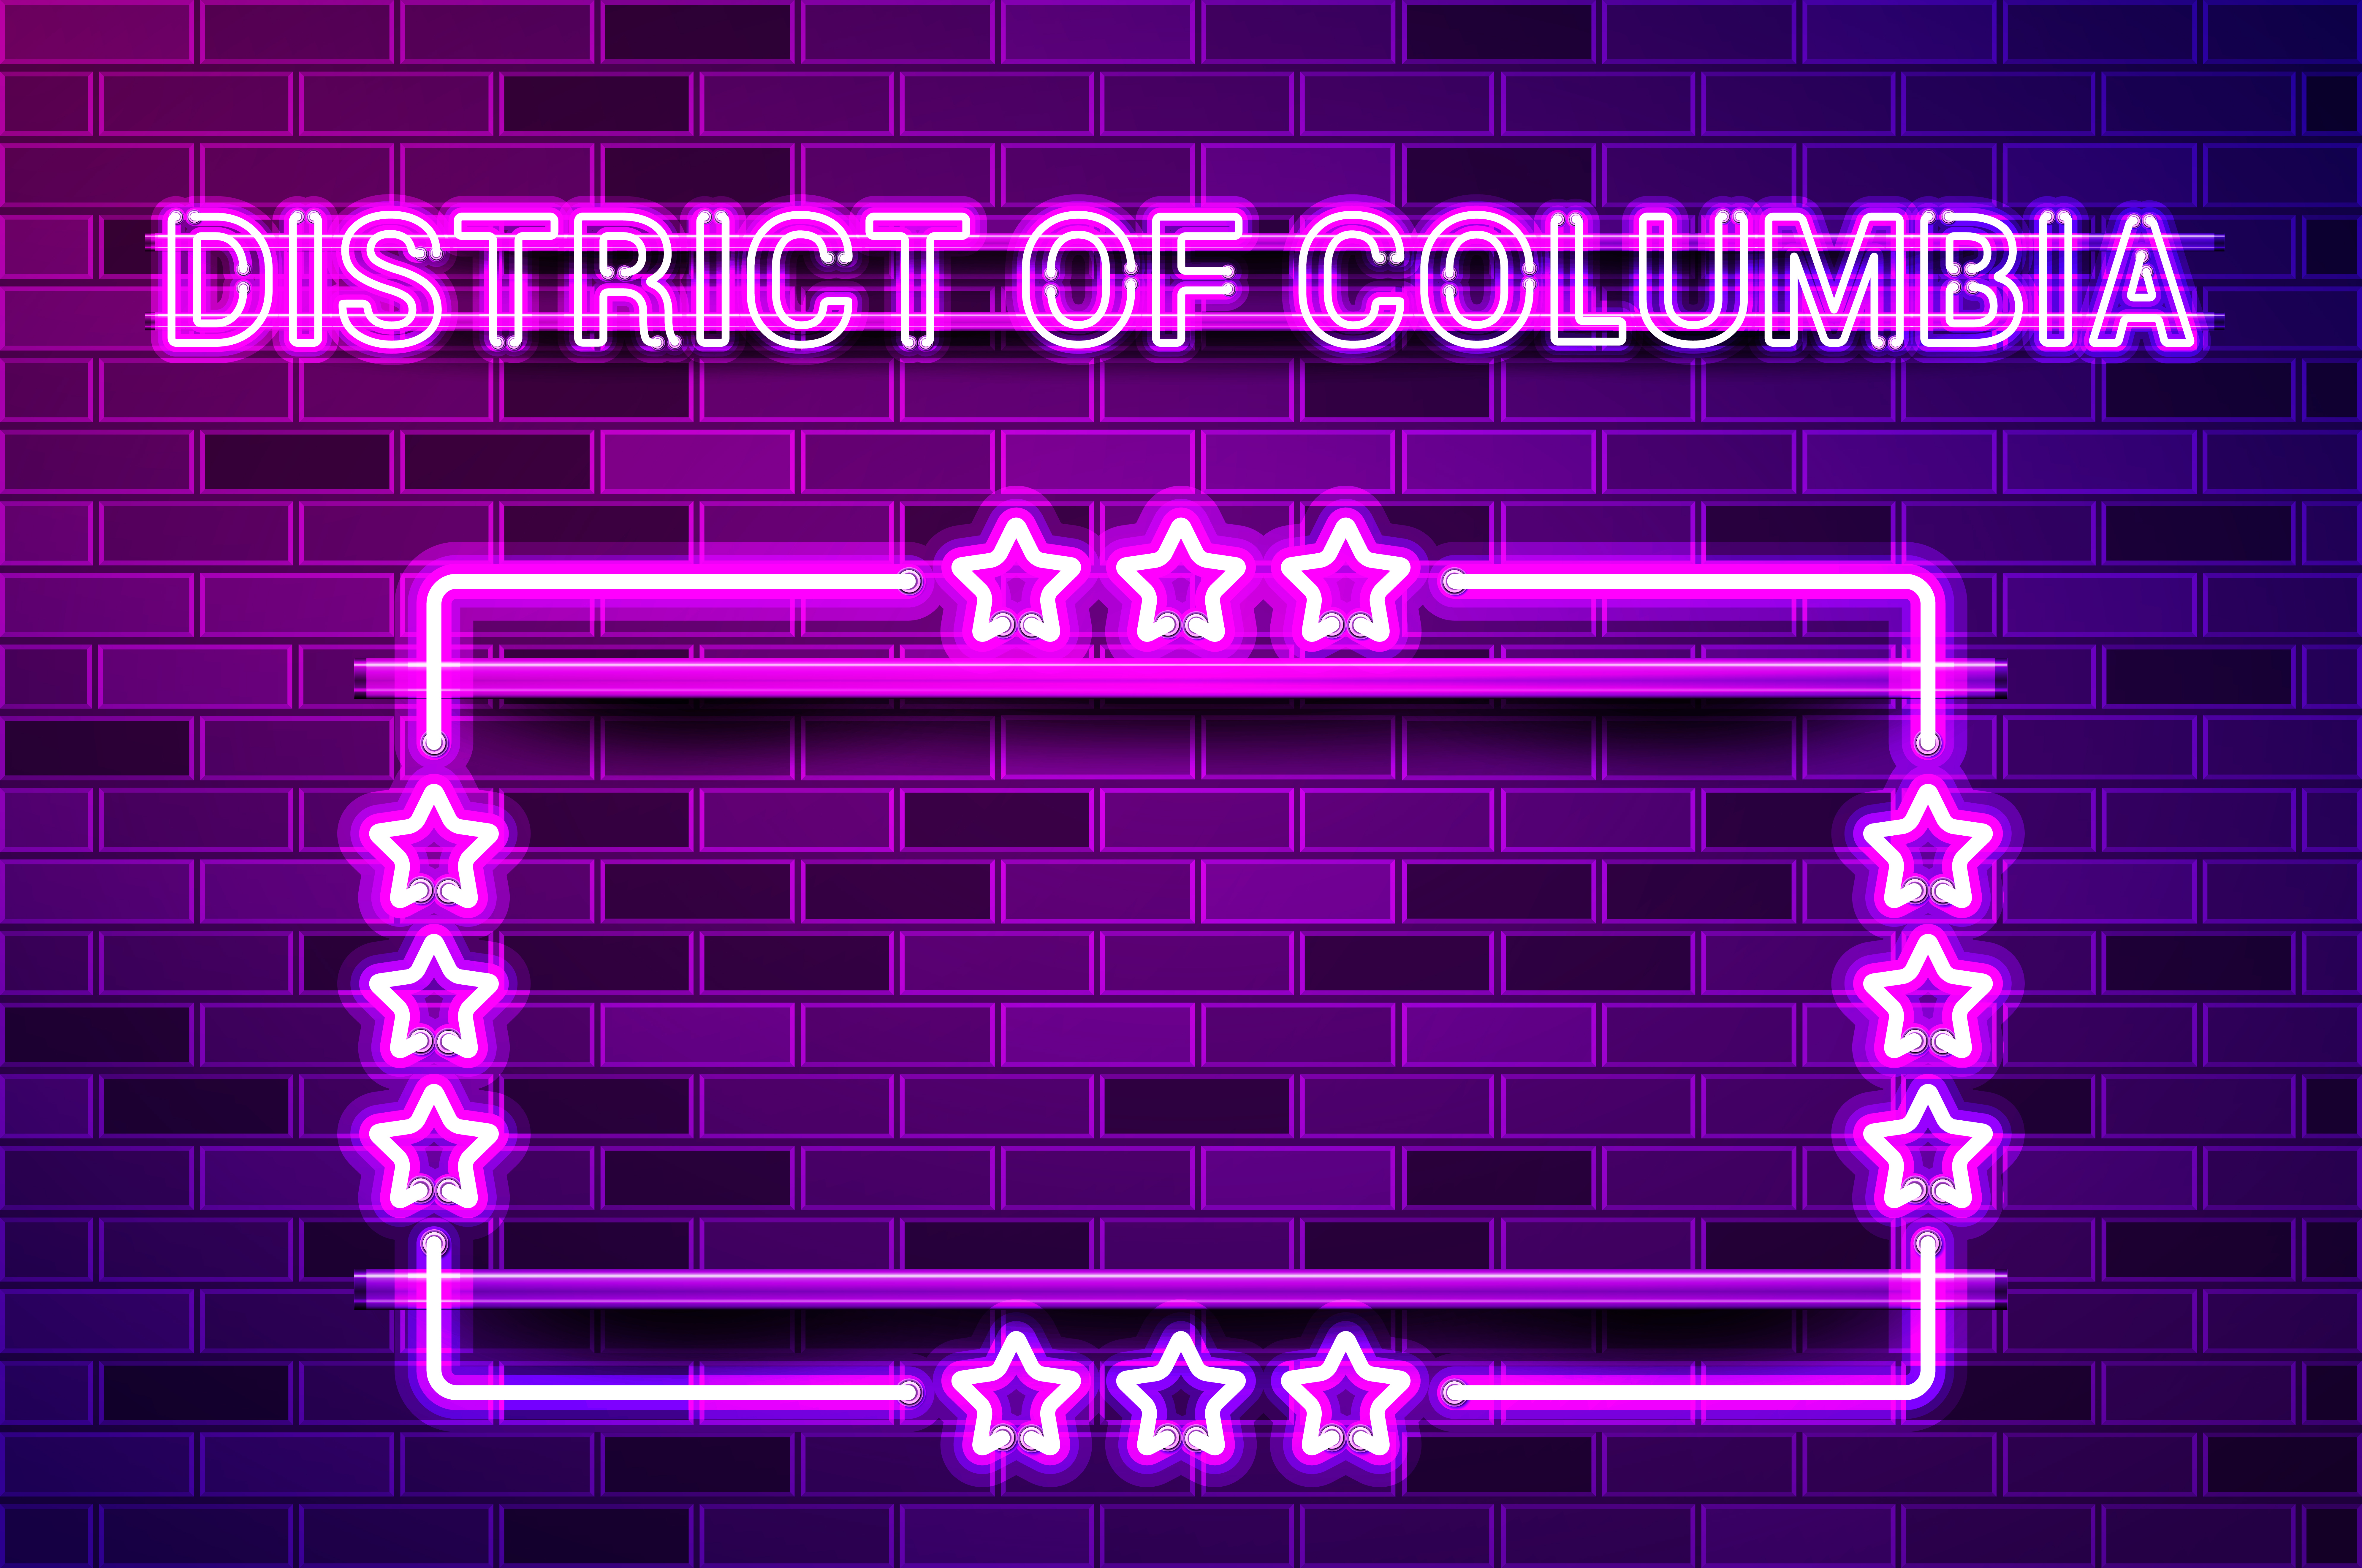 District of Columbia glowing purple neon lettering and a rectangular frame with stars. Realistic vector illustration. Purple brick wall, violet glow, metal holders.. District of Columbia glowing purple neon lettering and a rectangular frame with stars